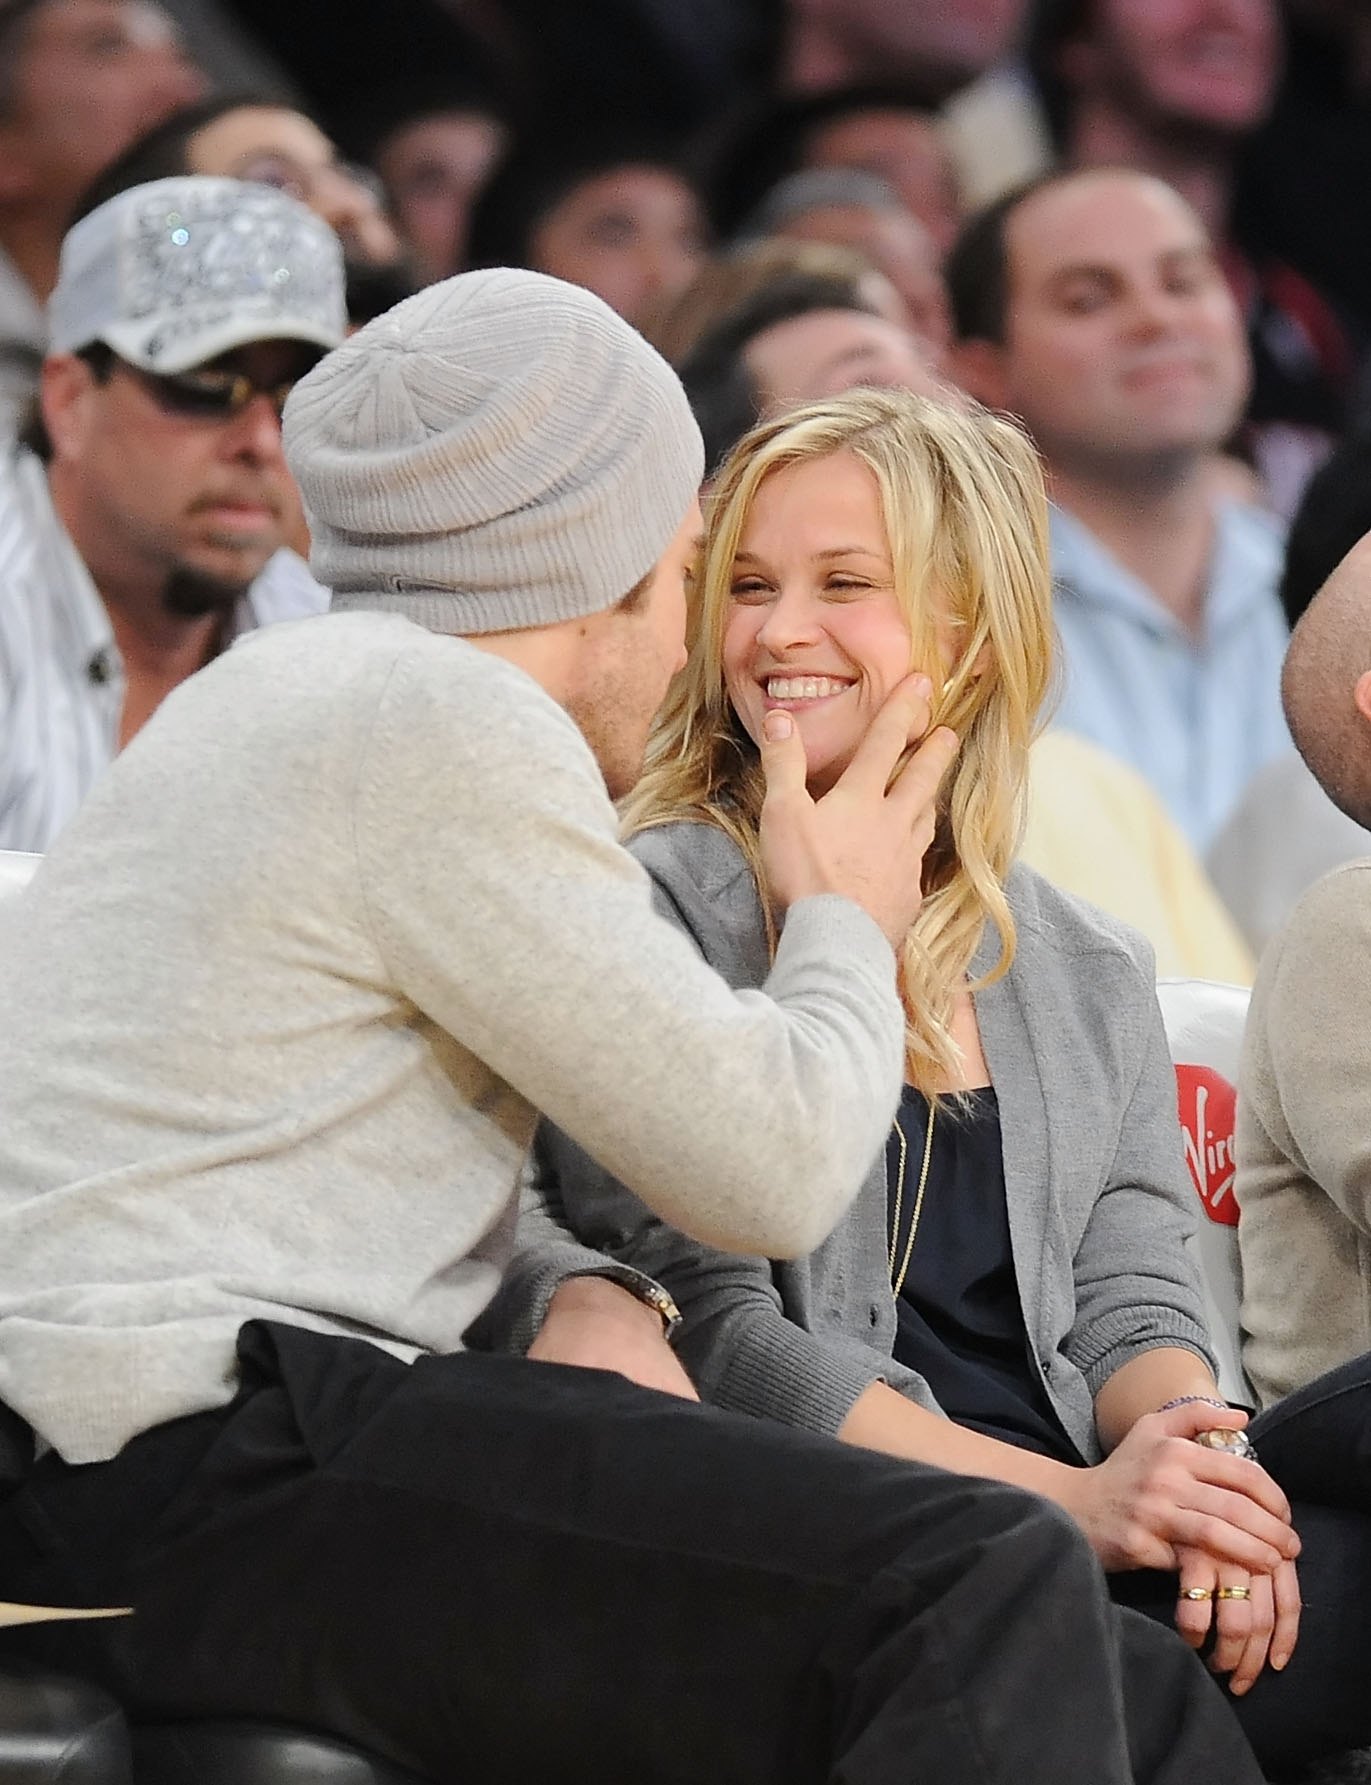 Jake Gyllenhaal and Reese Witherspoon at the Los Angeles Lakers vs Portland Trailblazers game at the Staples Center, on January 4, 2009, in Los Angeles, California | Source: Getty Image